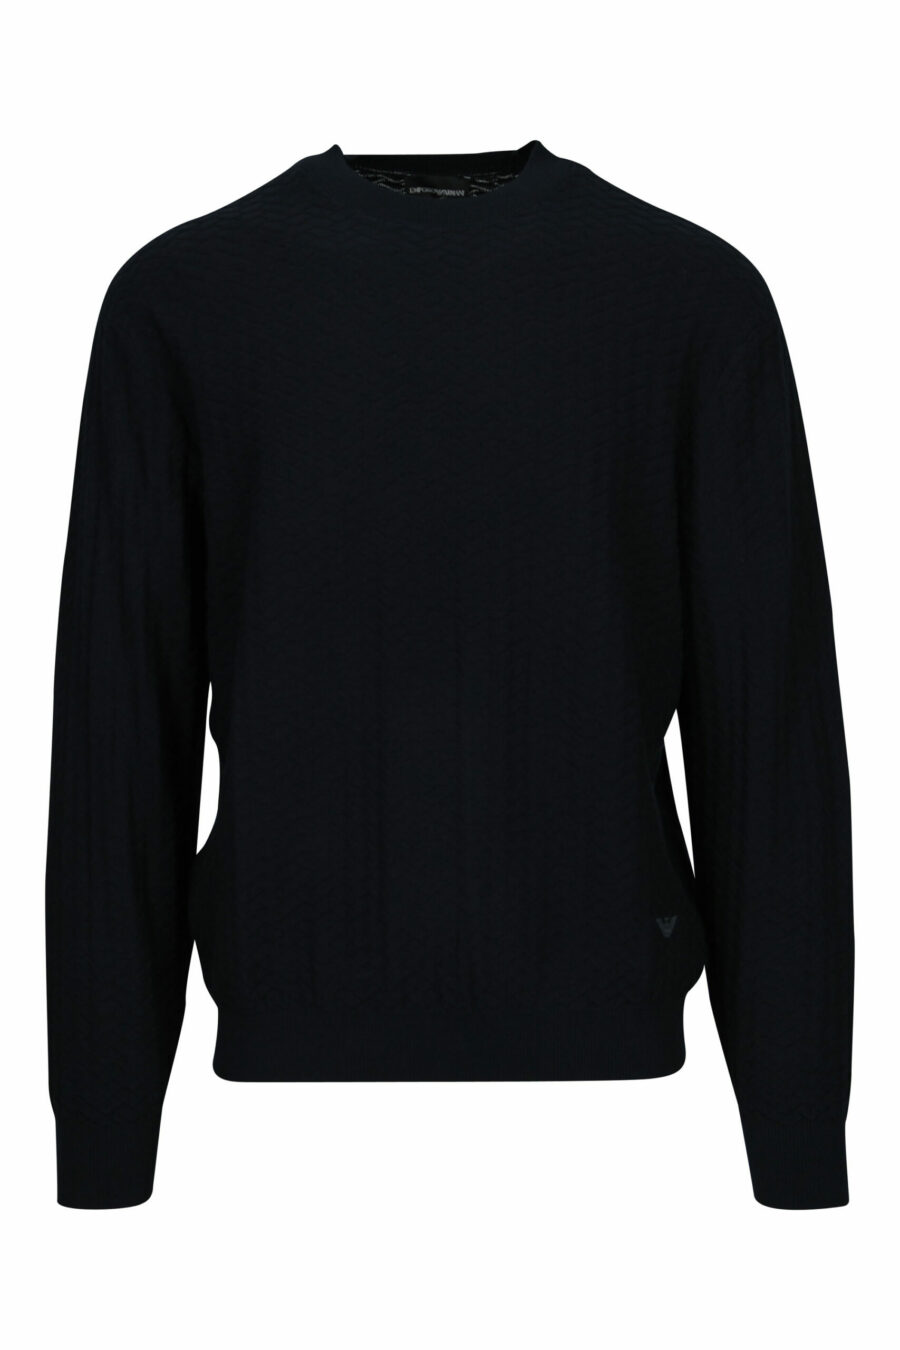 Black knitted jumper with eagle mini logo - 8058947973712 scaled